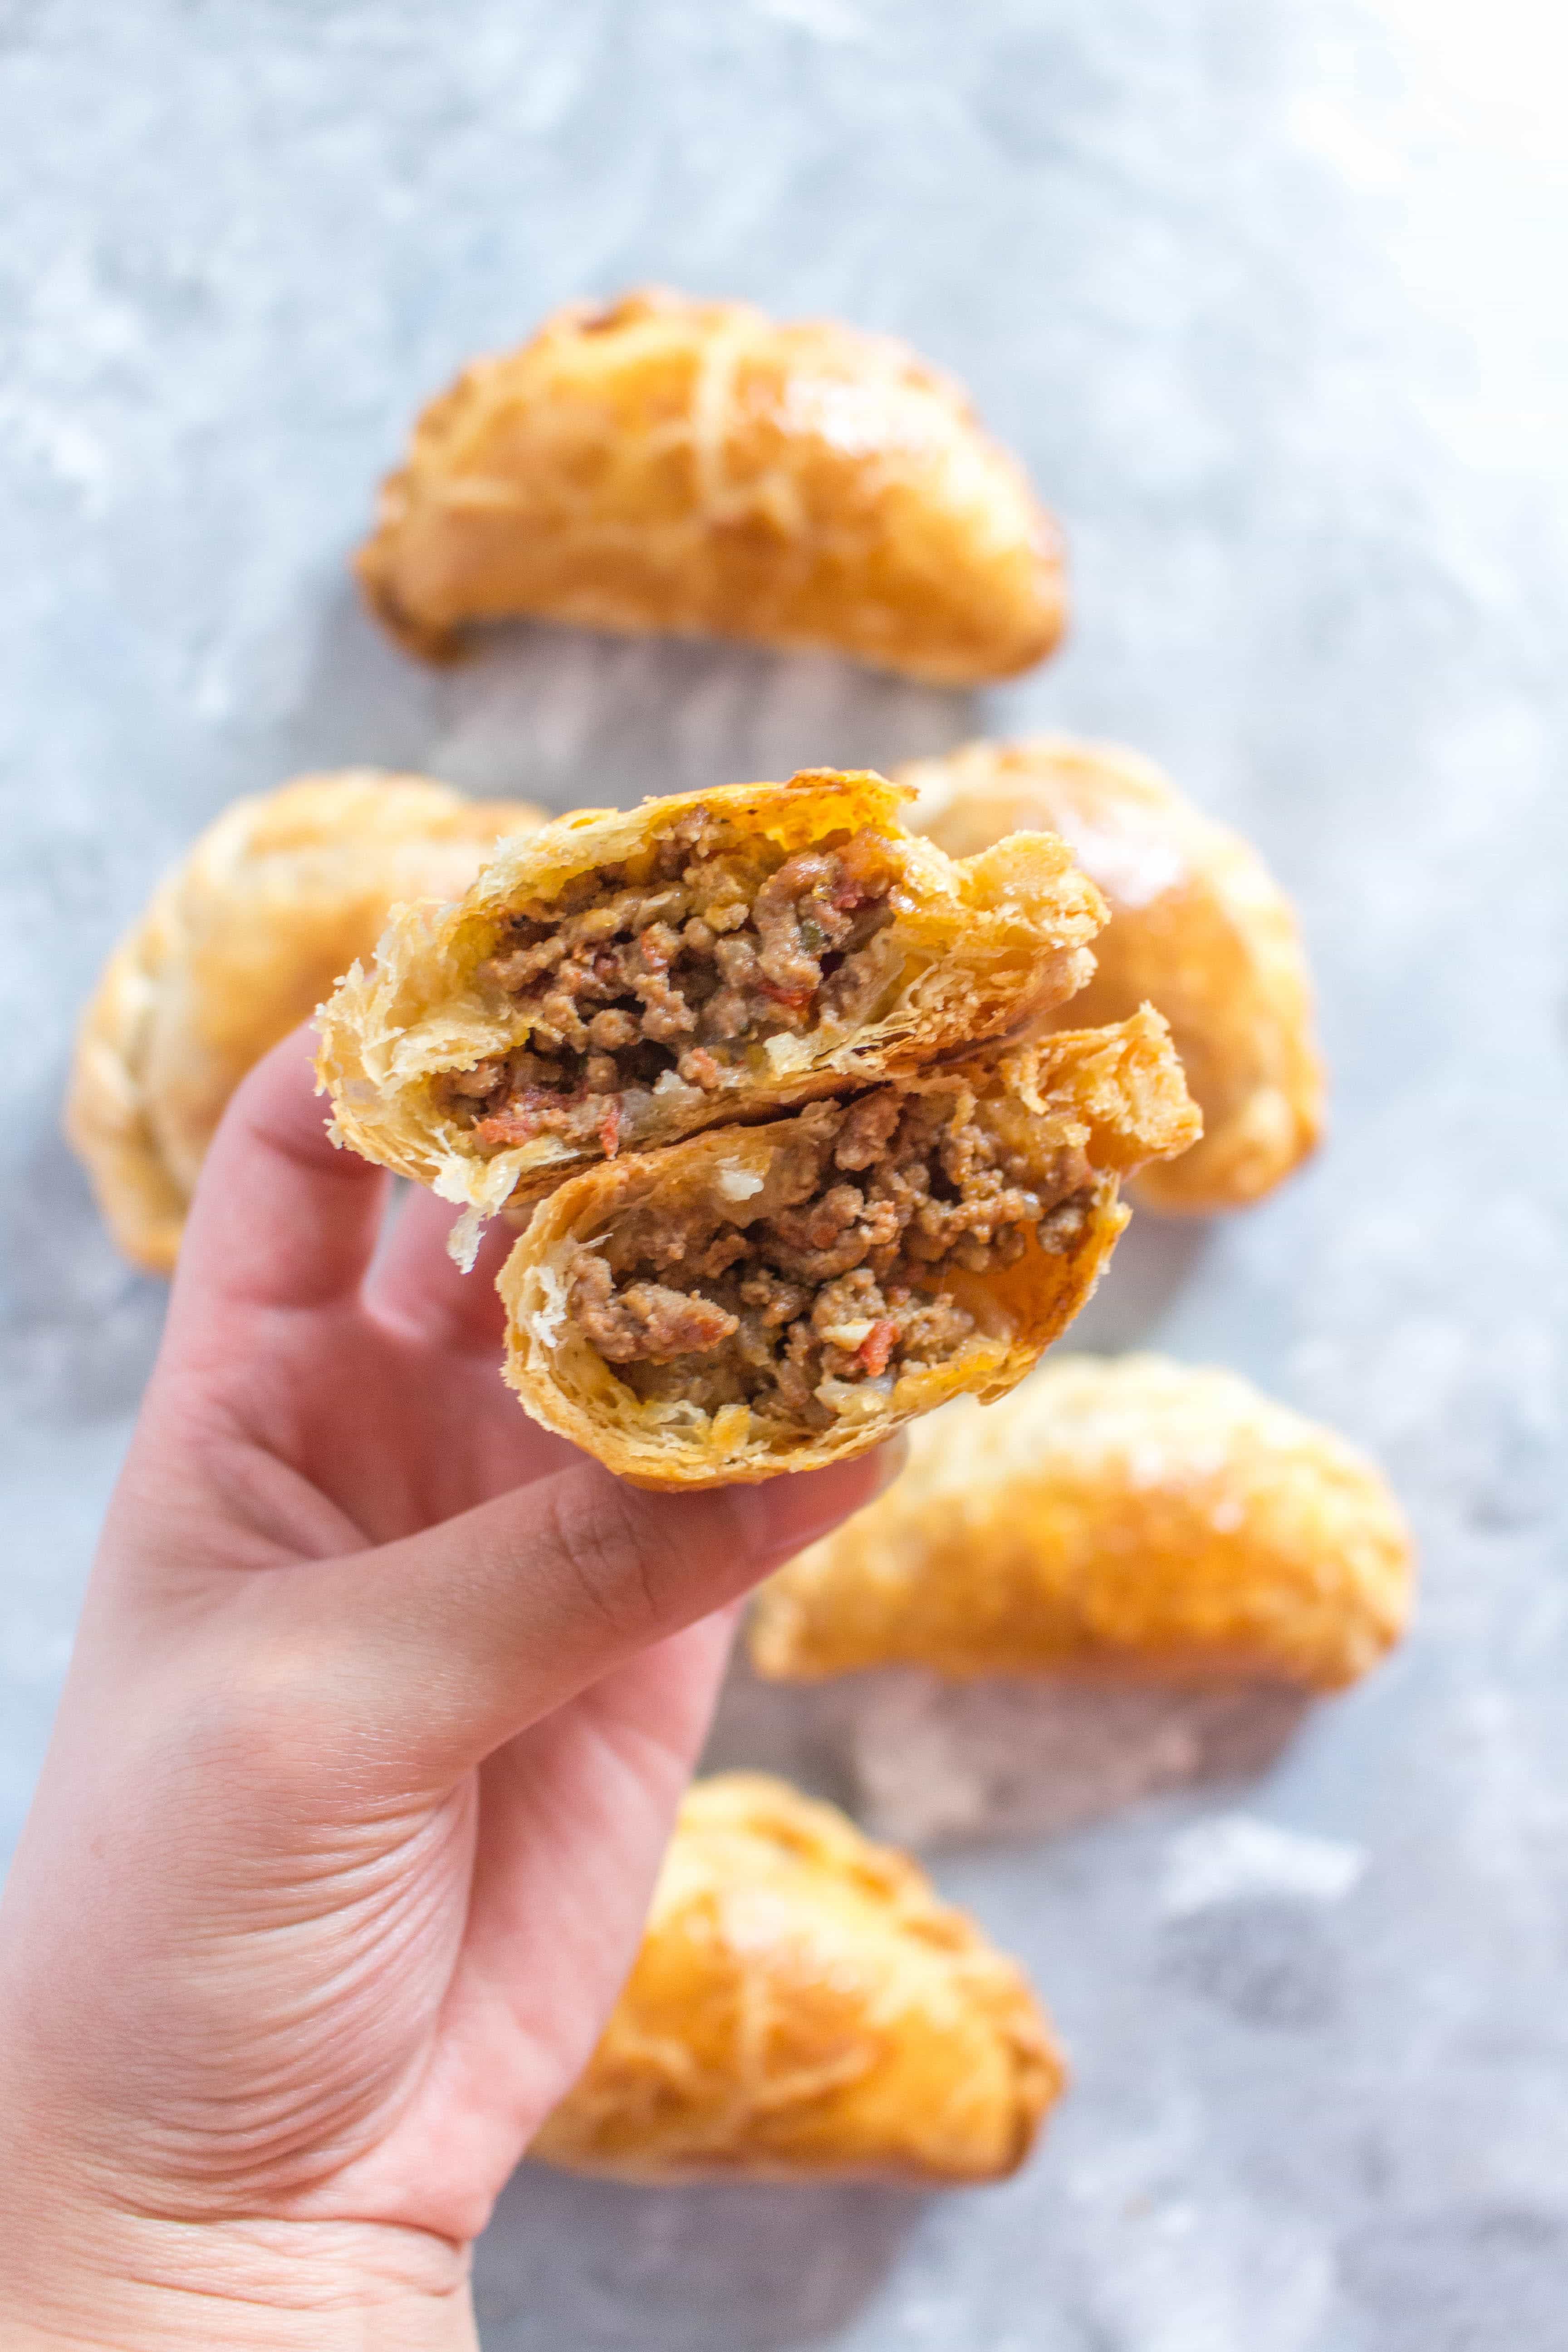 Delicious, flakey, and stuffed full of beef, these freezer friendly beef empanadas are the perfect snack! Prep these freezer friendly beef empanadas ahead of time, freeze them, and then pop them into the oven whenever you're ready to eat them!